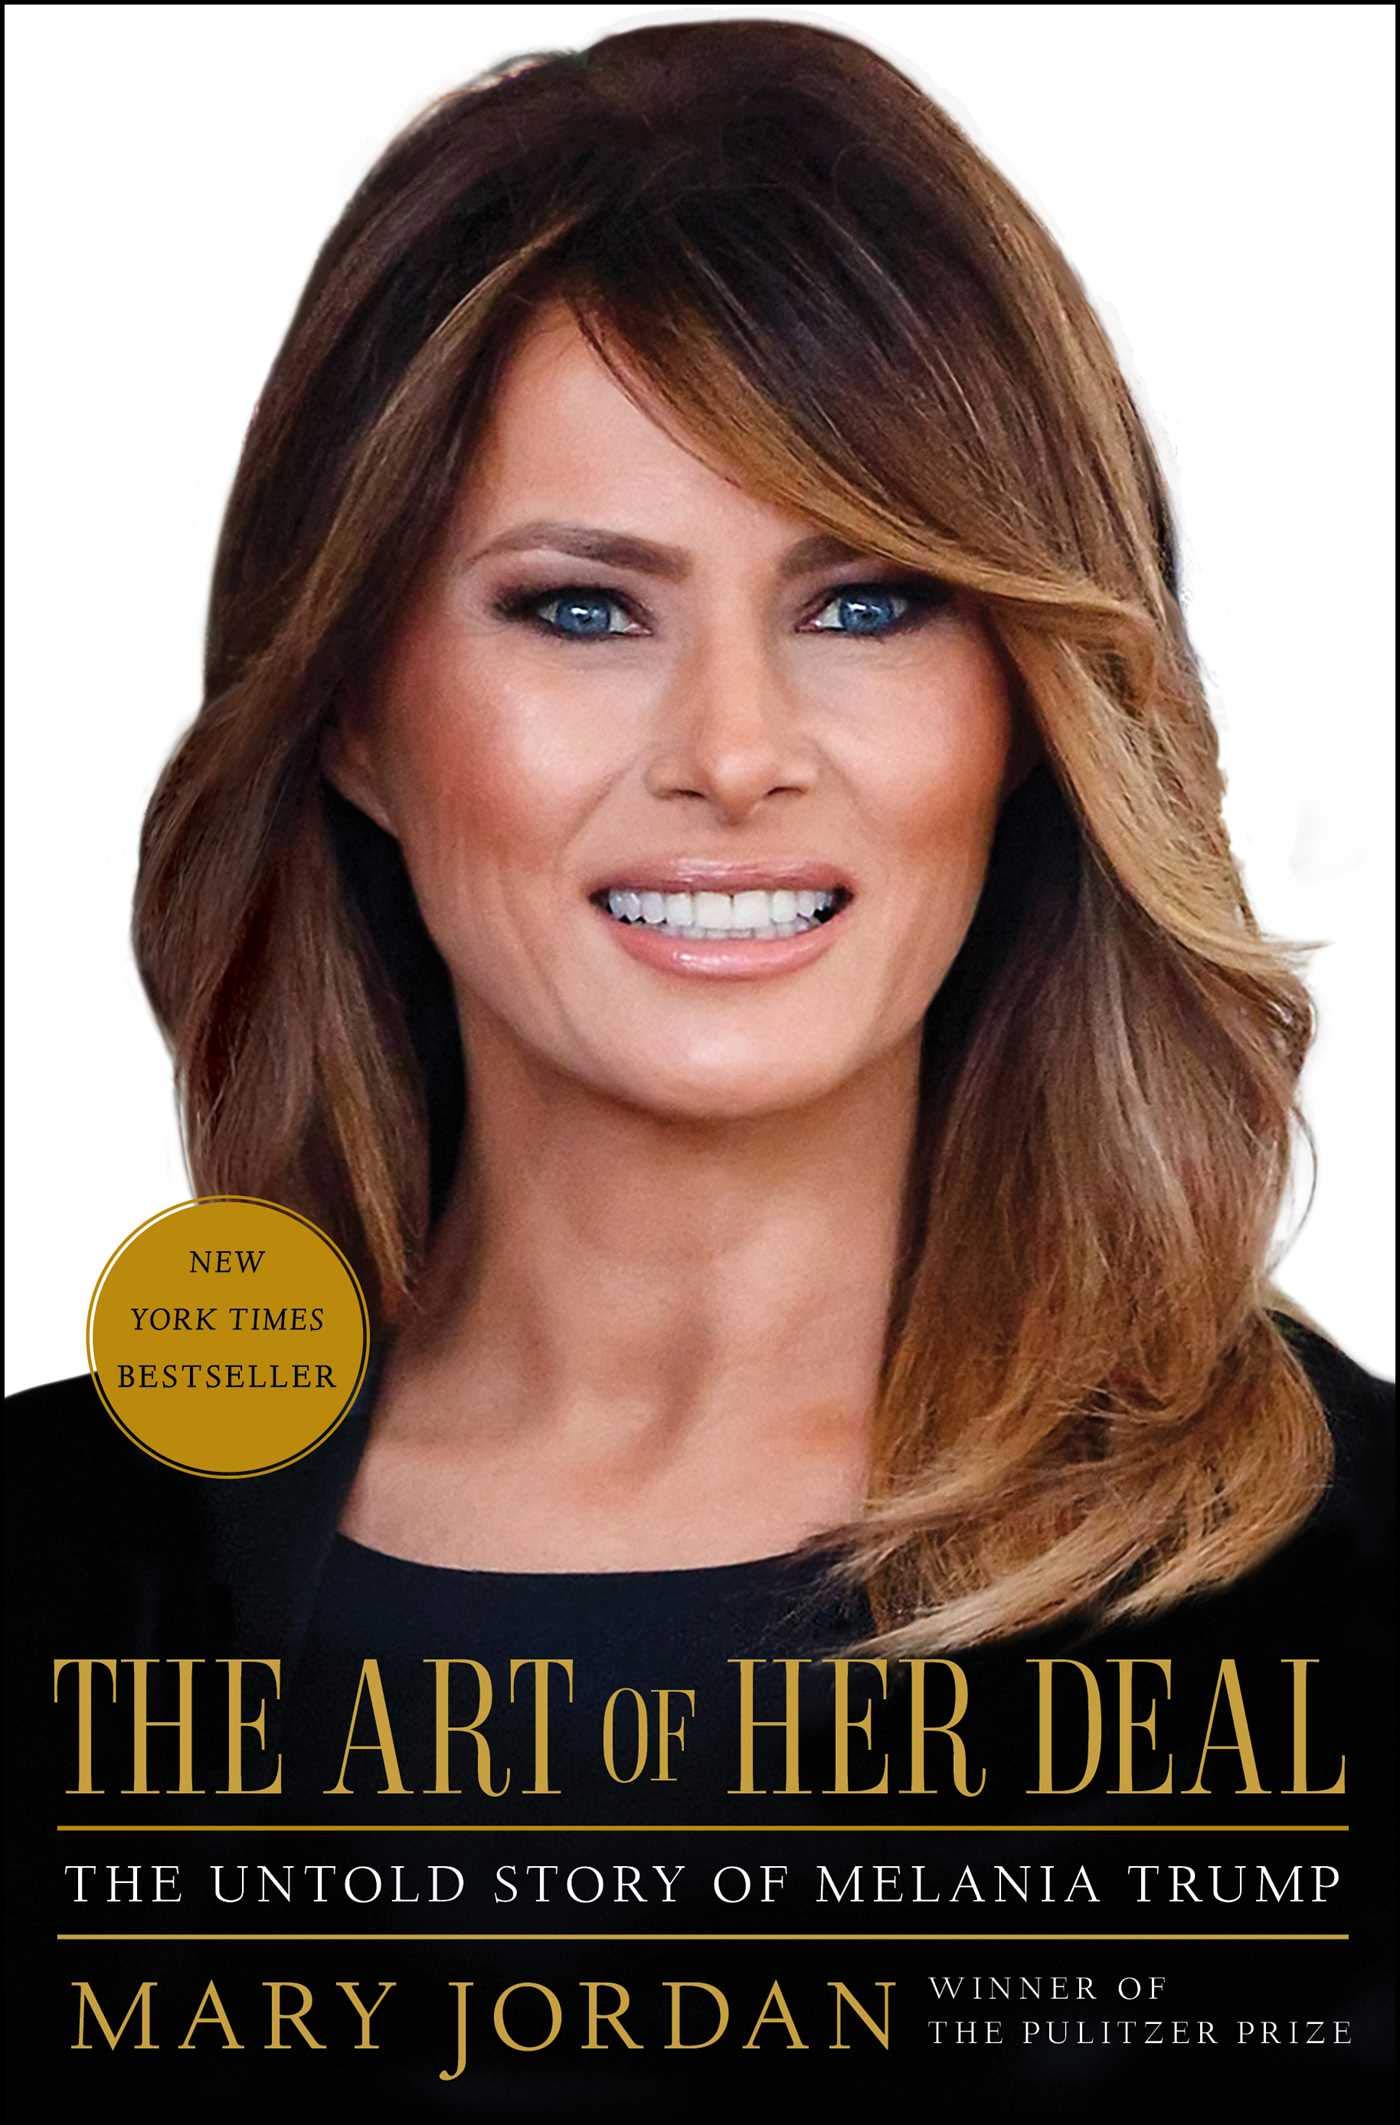 THE ART OF HER DEAL : THE UNTOLD STORY OF MELANIA TRUMP